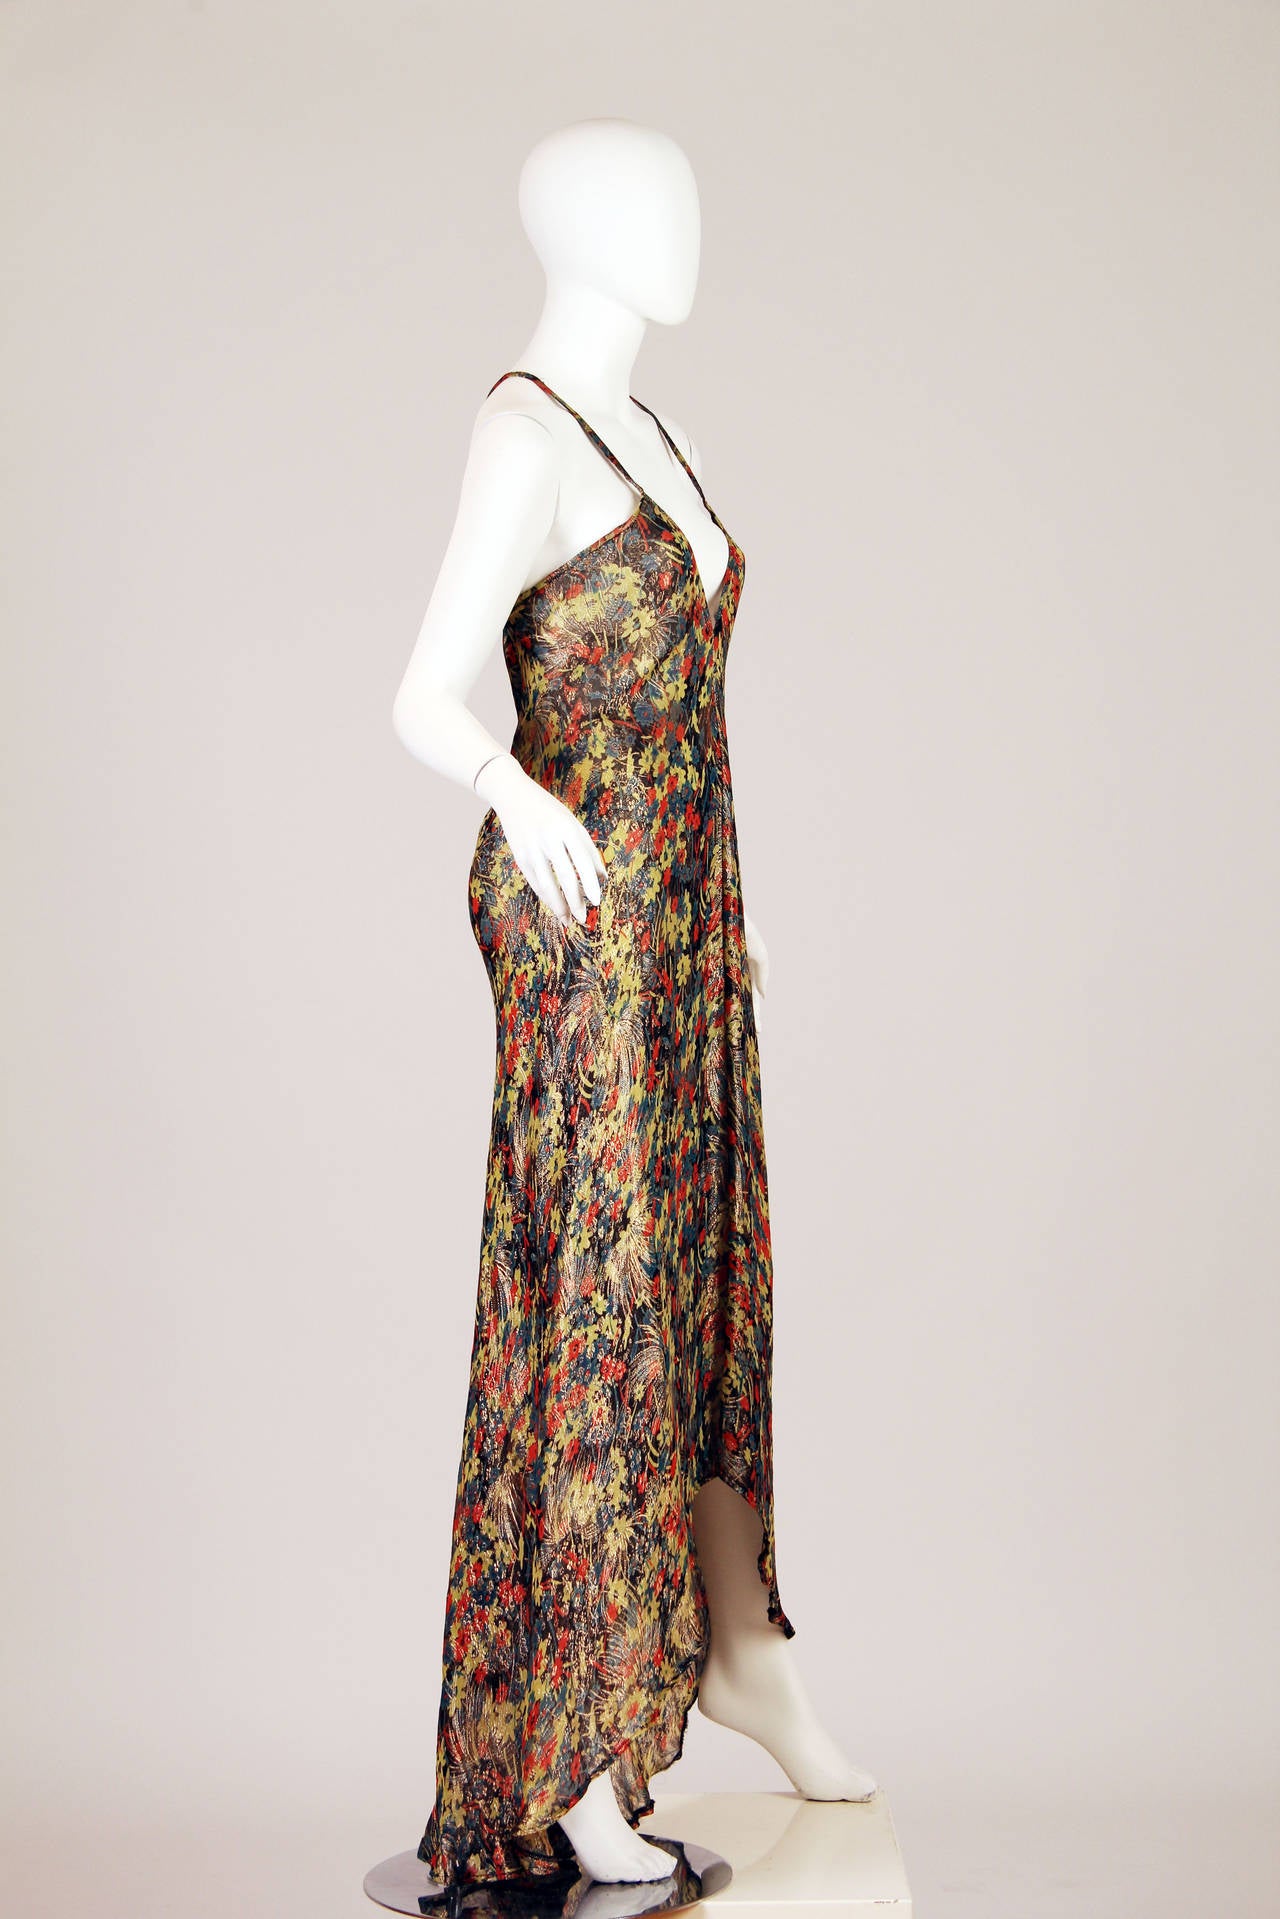 MORPHEW COLLECTION Gold Lamé Silk Gown Made From Vintage 1930S Fabric
MORPHEW COLLECTION is made entirely by hand in our NYC Ateliér of rare antique materials sourced from around the globe. Our sustainable vintage materials represent over a century